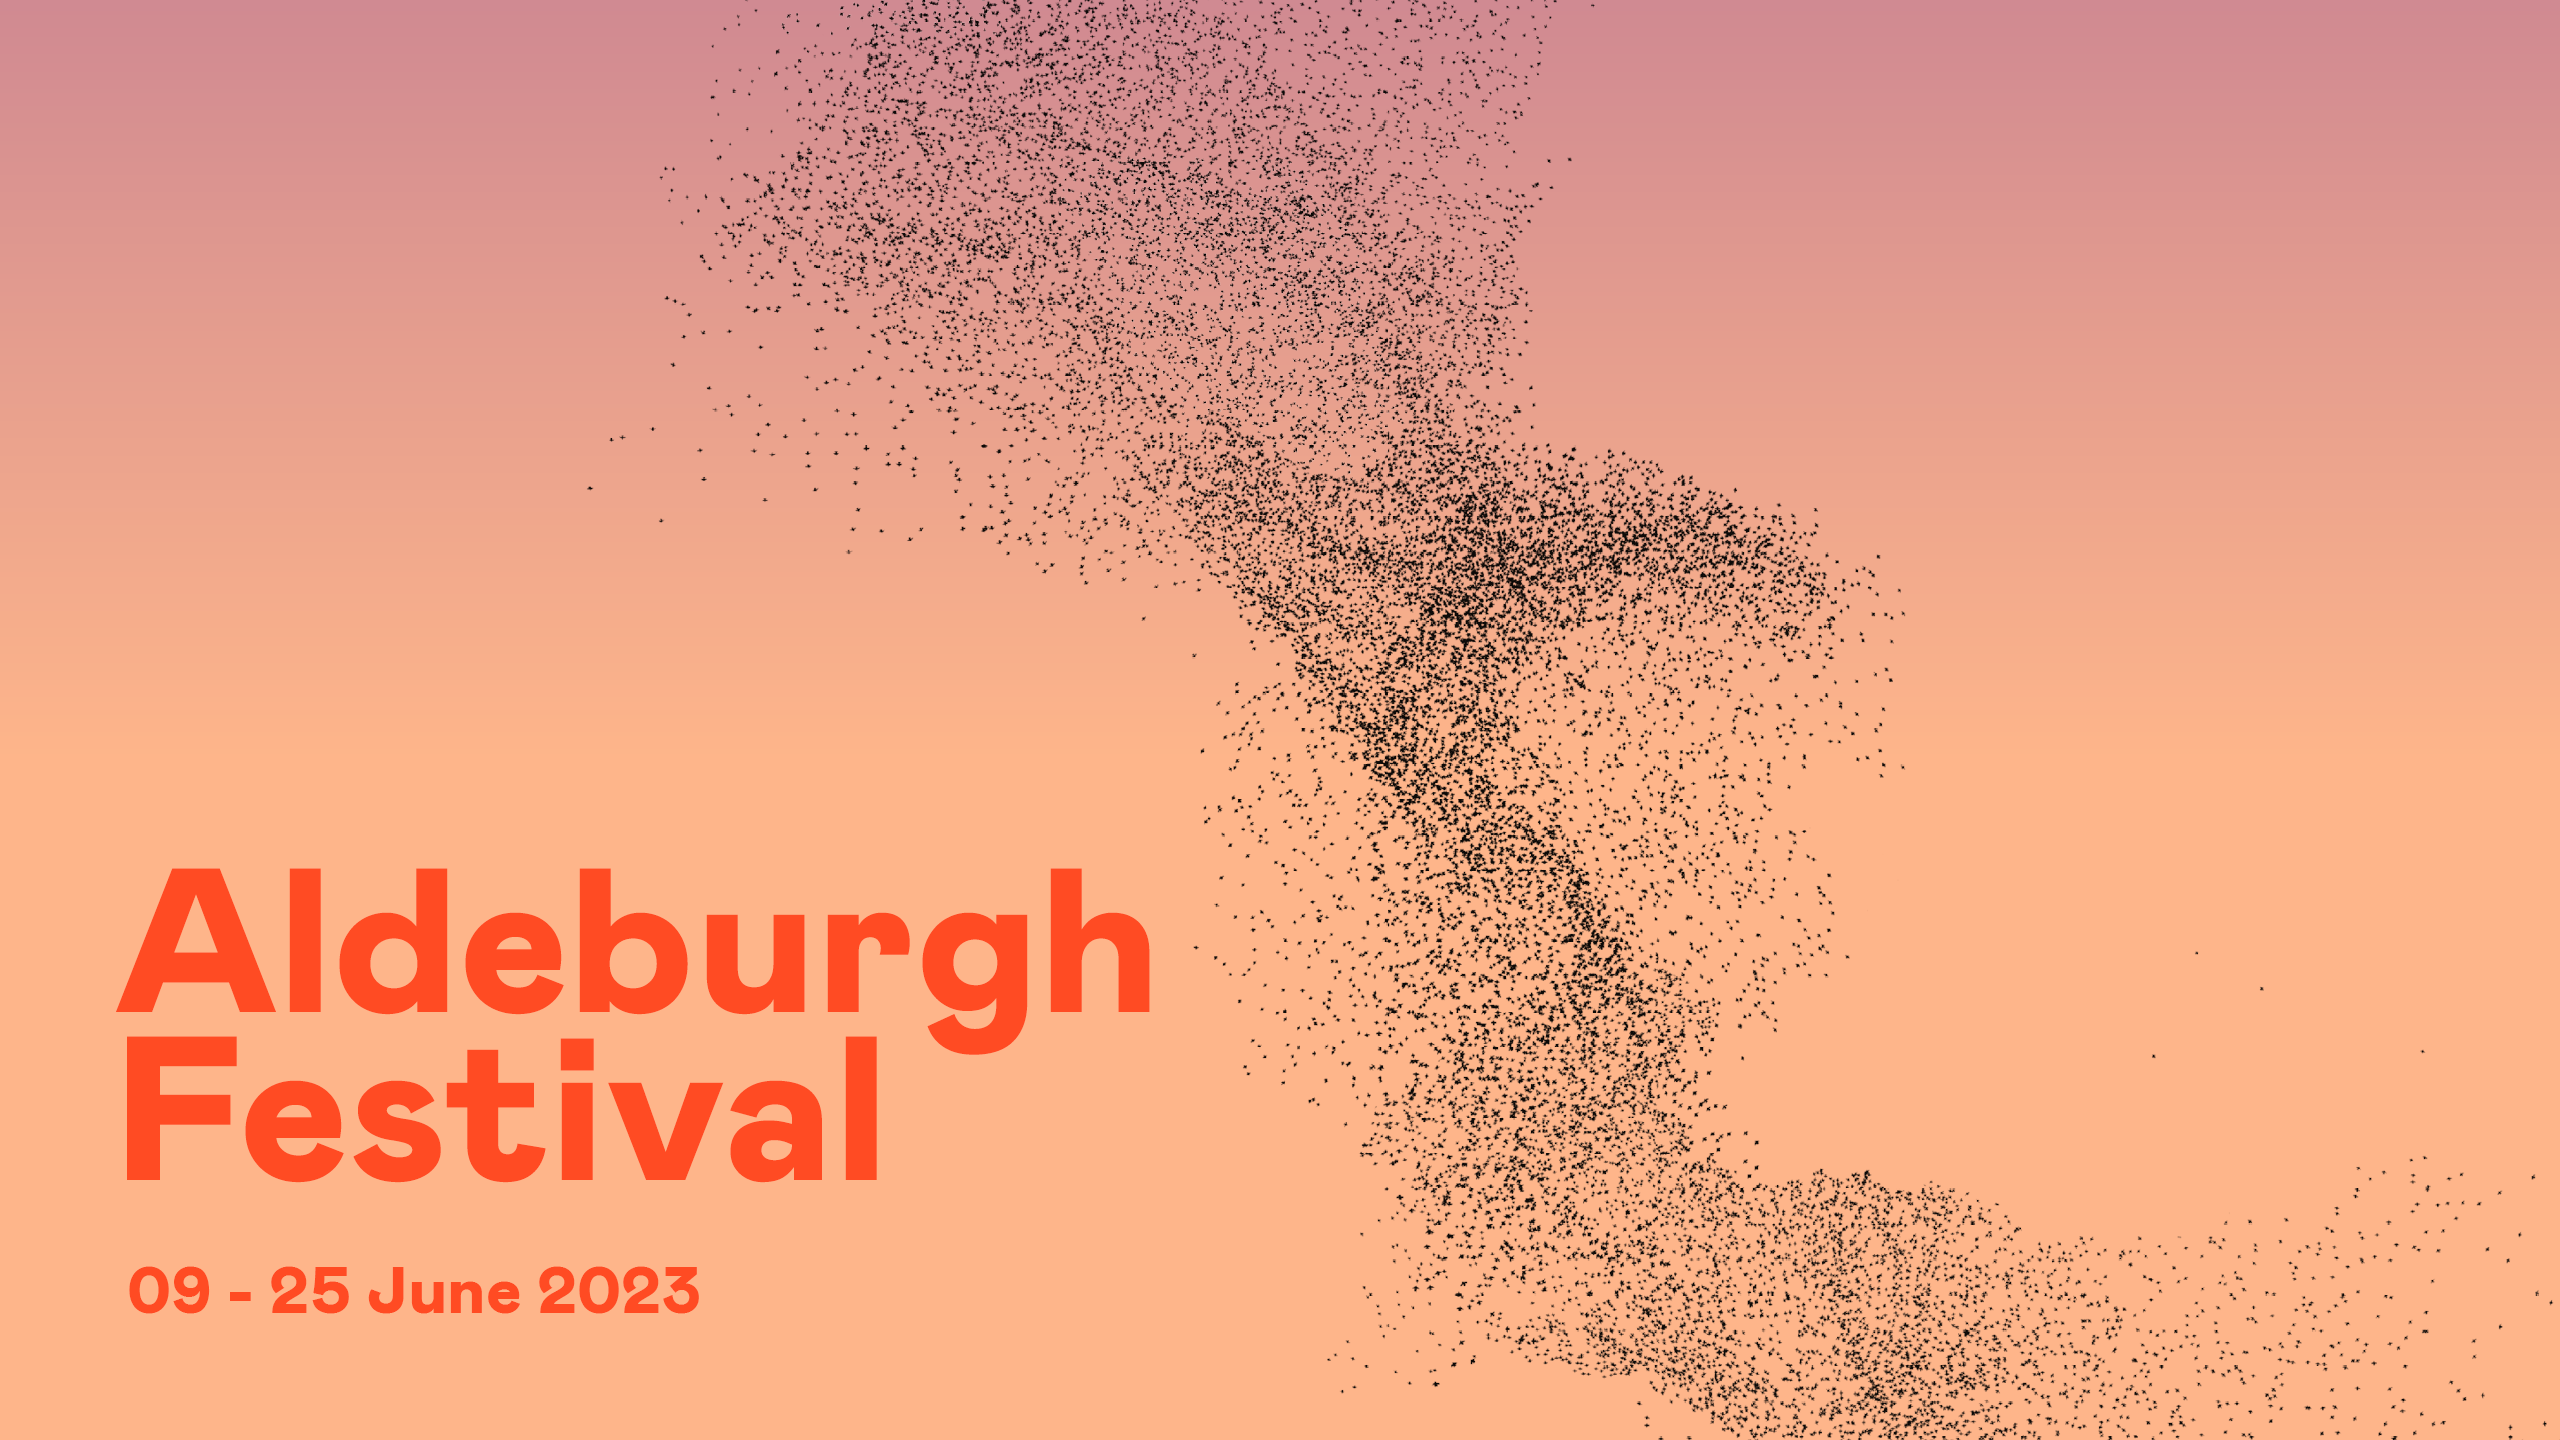 Aldeburgh Festival 2023 poster with starlings flying in the sky